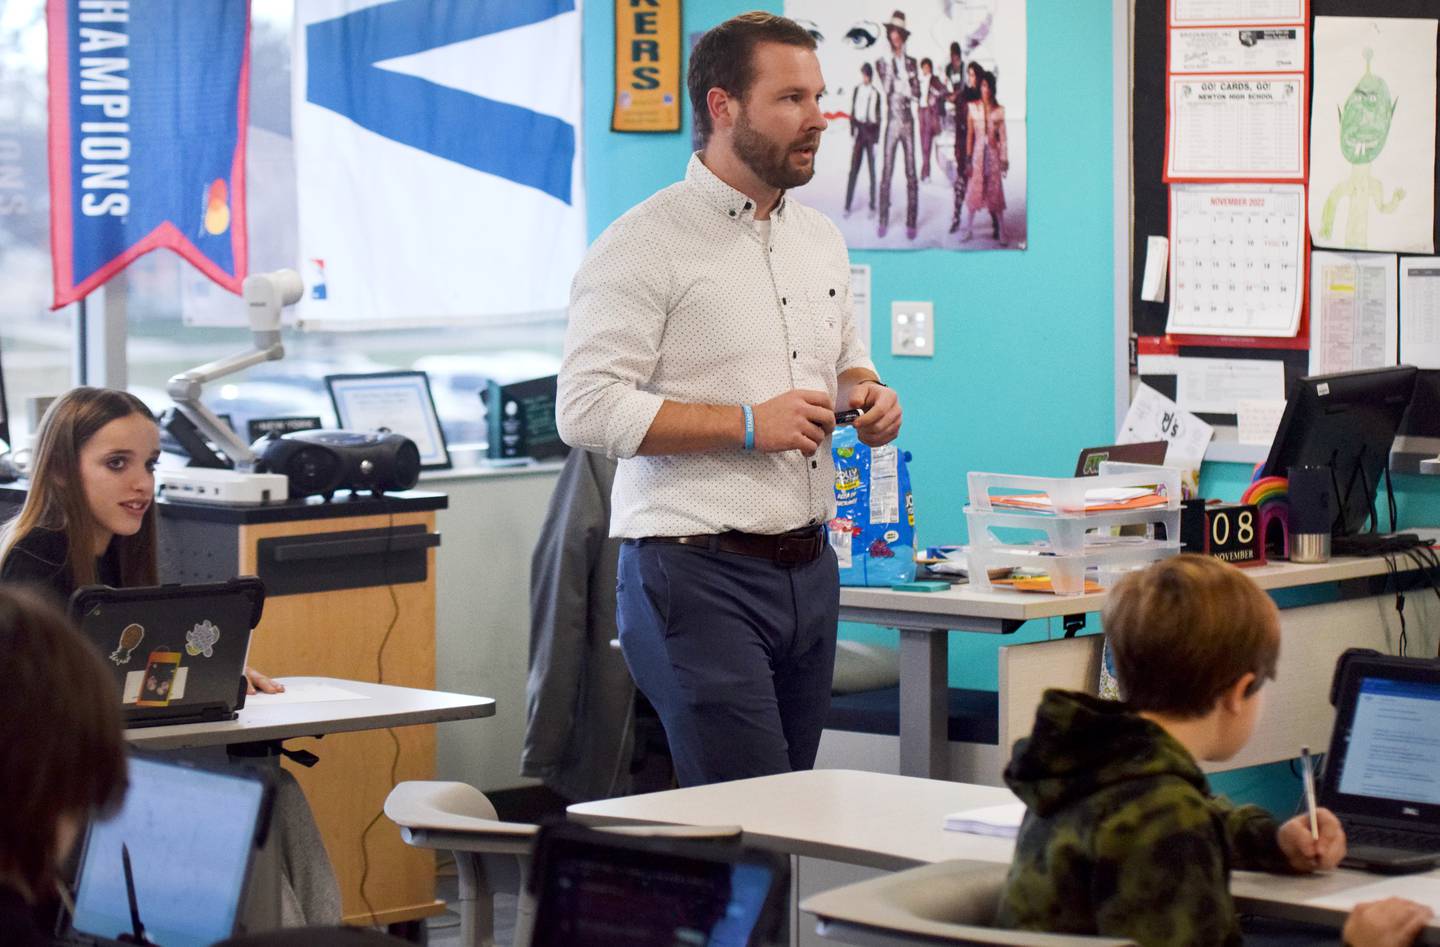 Tyler Stewart, a Democratic candidate running for Iowa Senate District 19, finishes teaching a class at Berg Middle School on Nov. 8 in Newton.